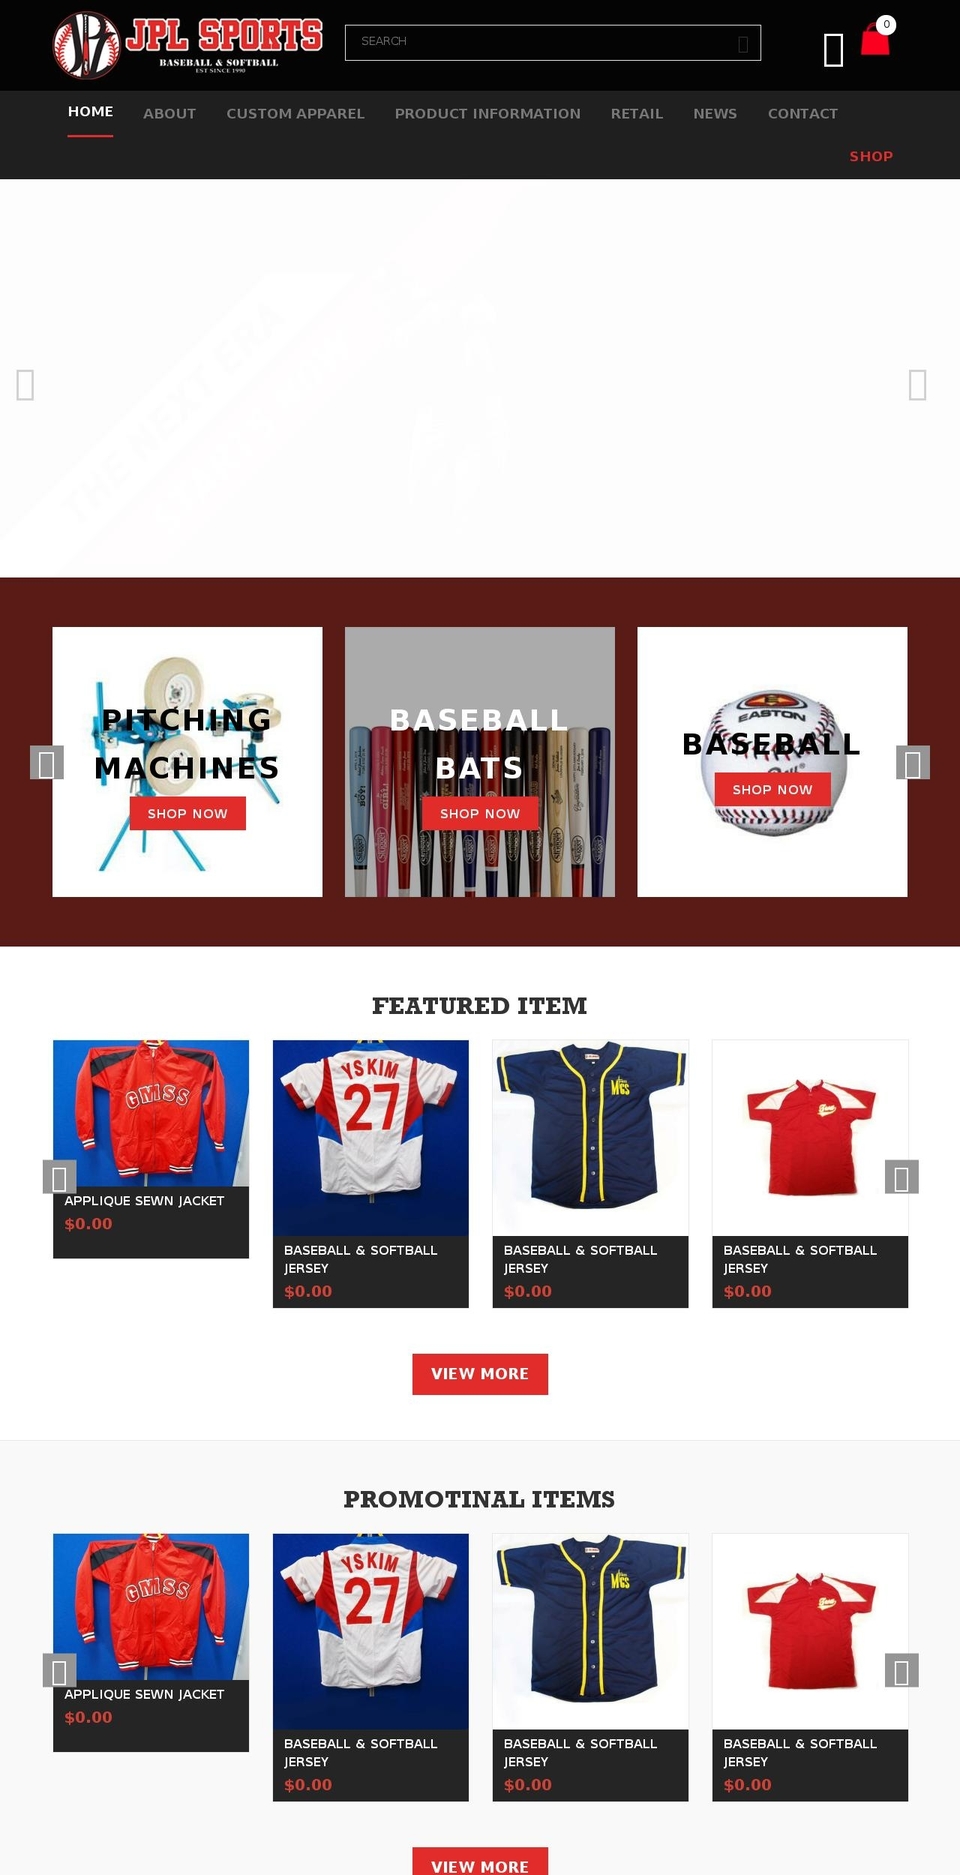 yourstore-v2-1-3 Shopify theme site example jplsports.com.sg